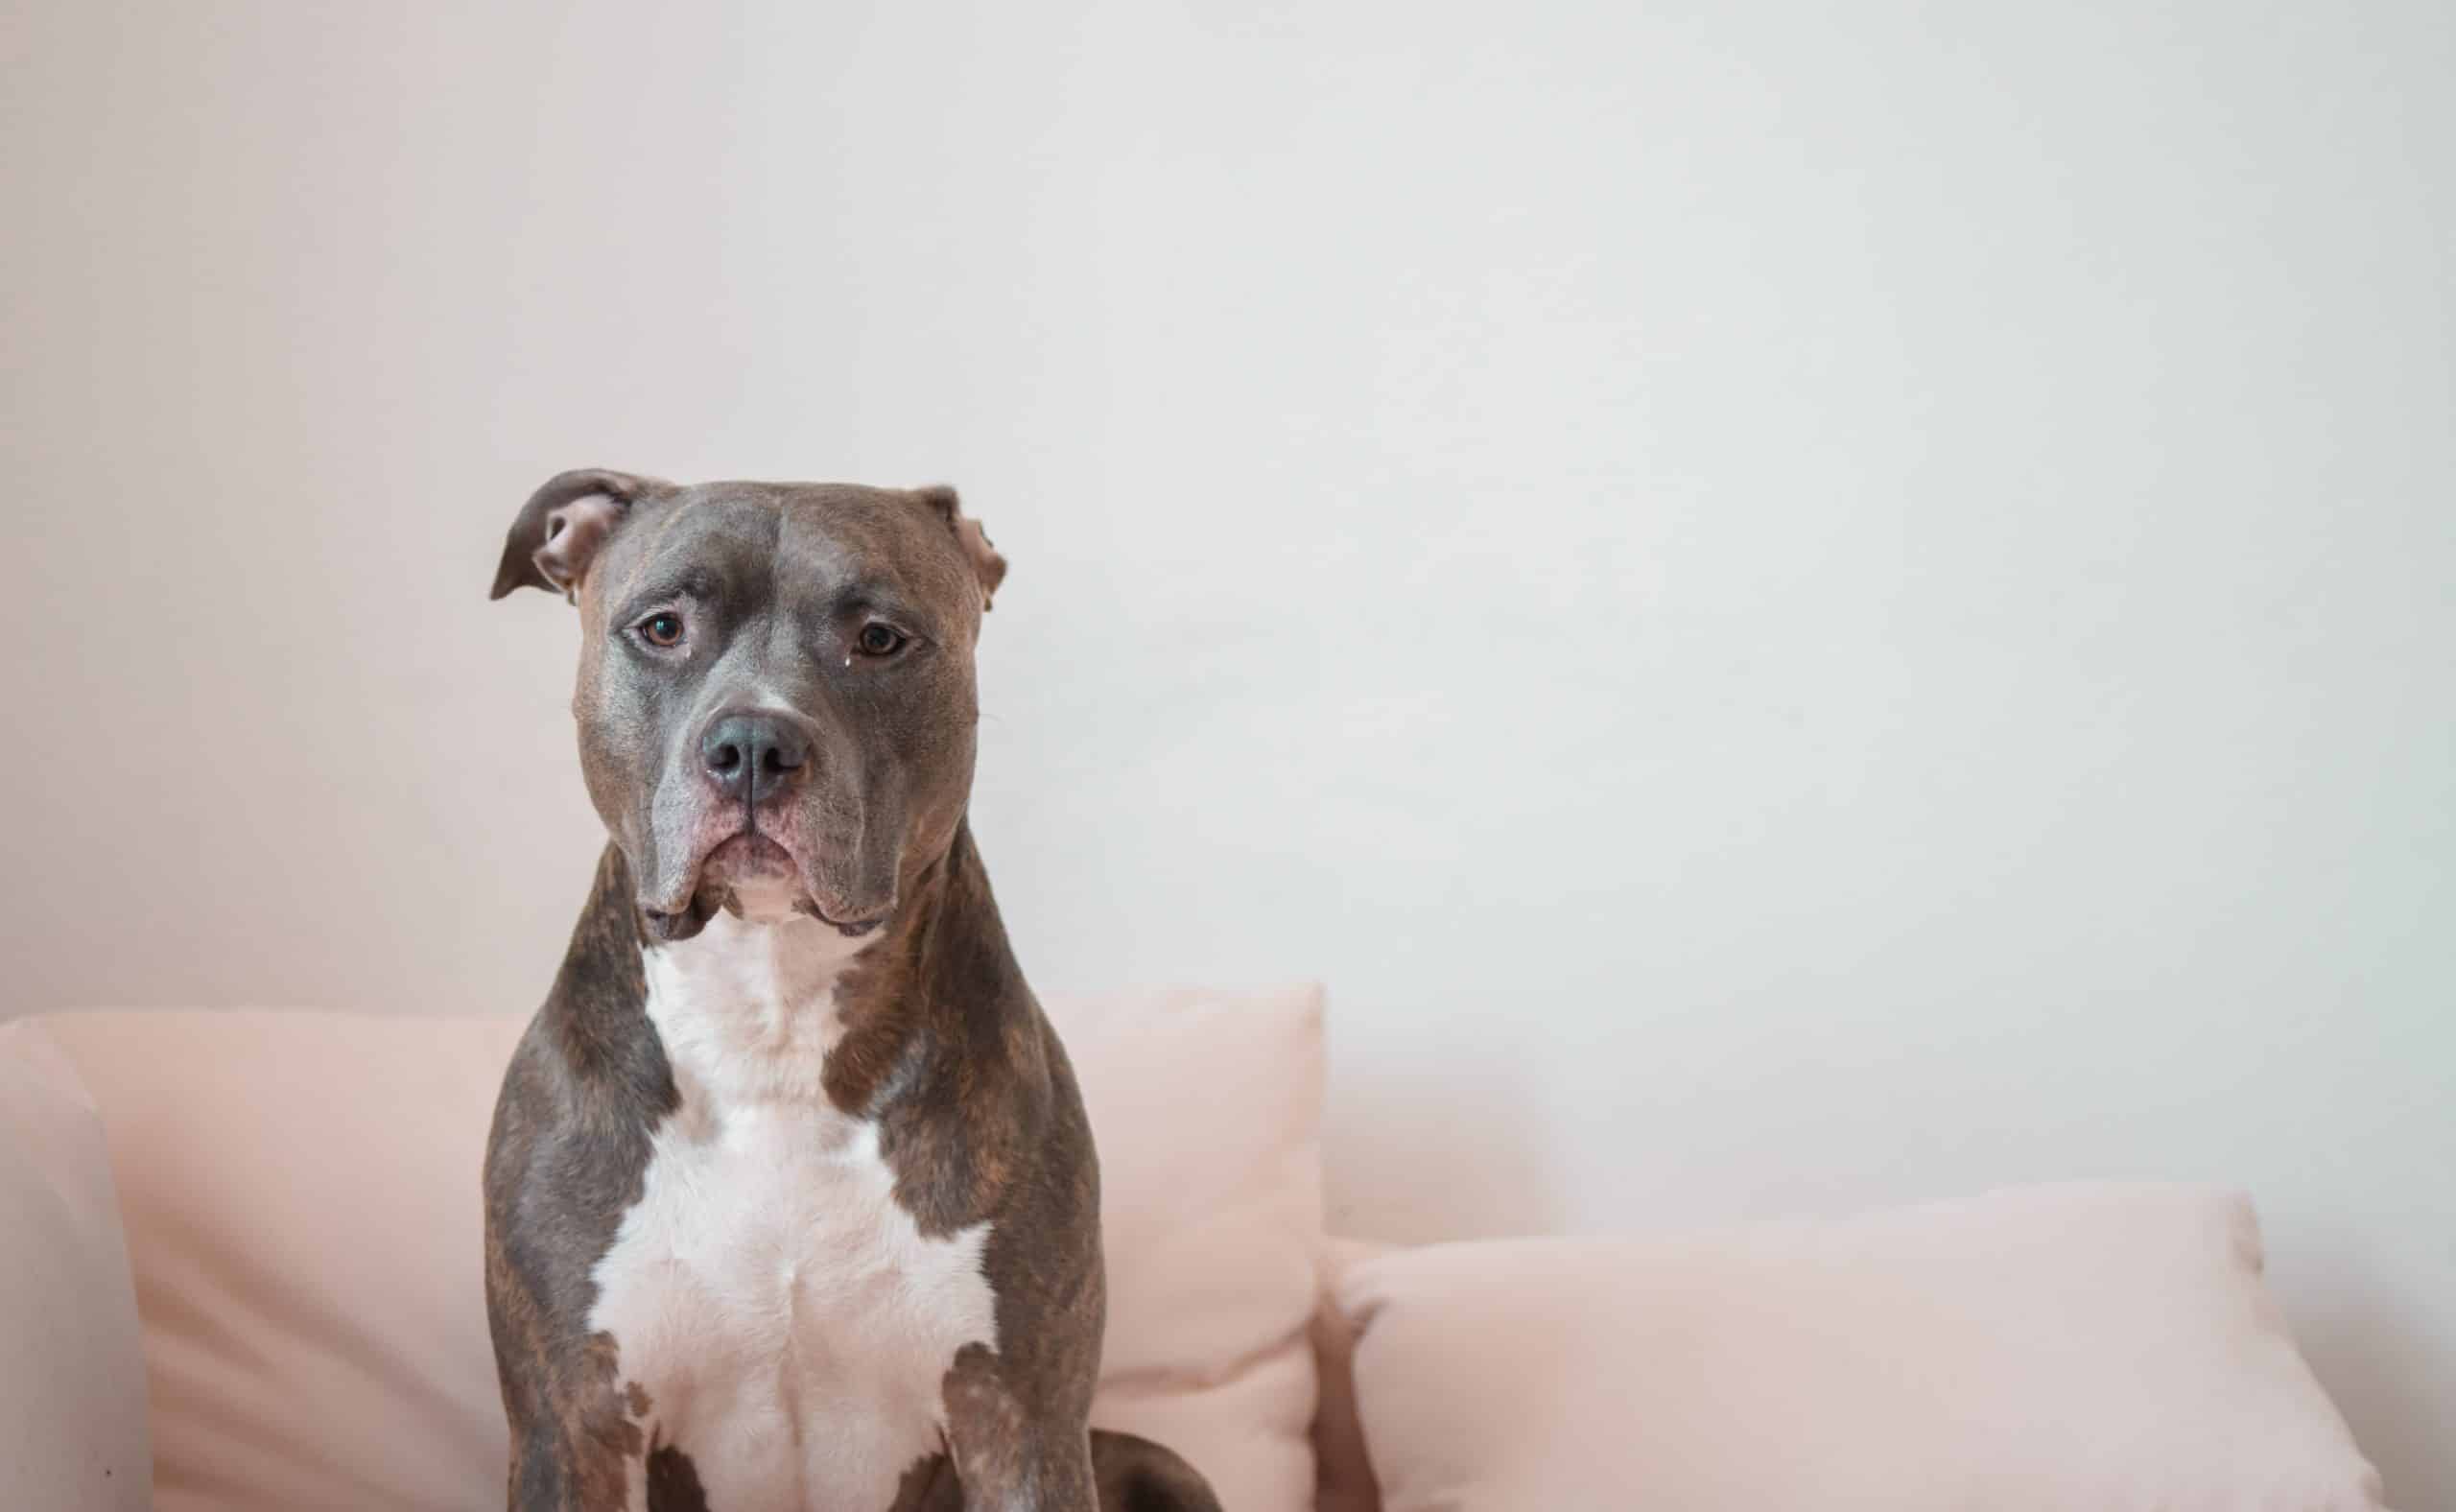 Pitbull dog on a couch.